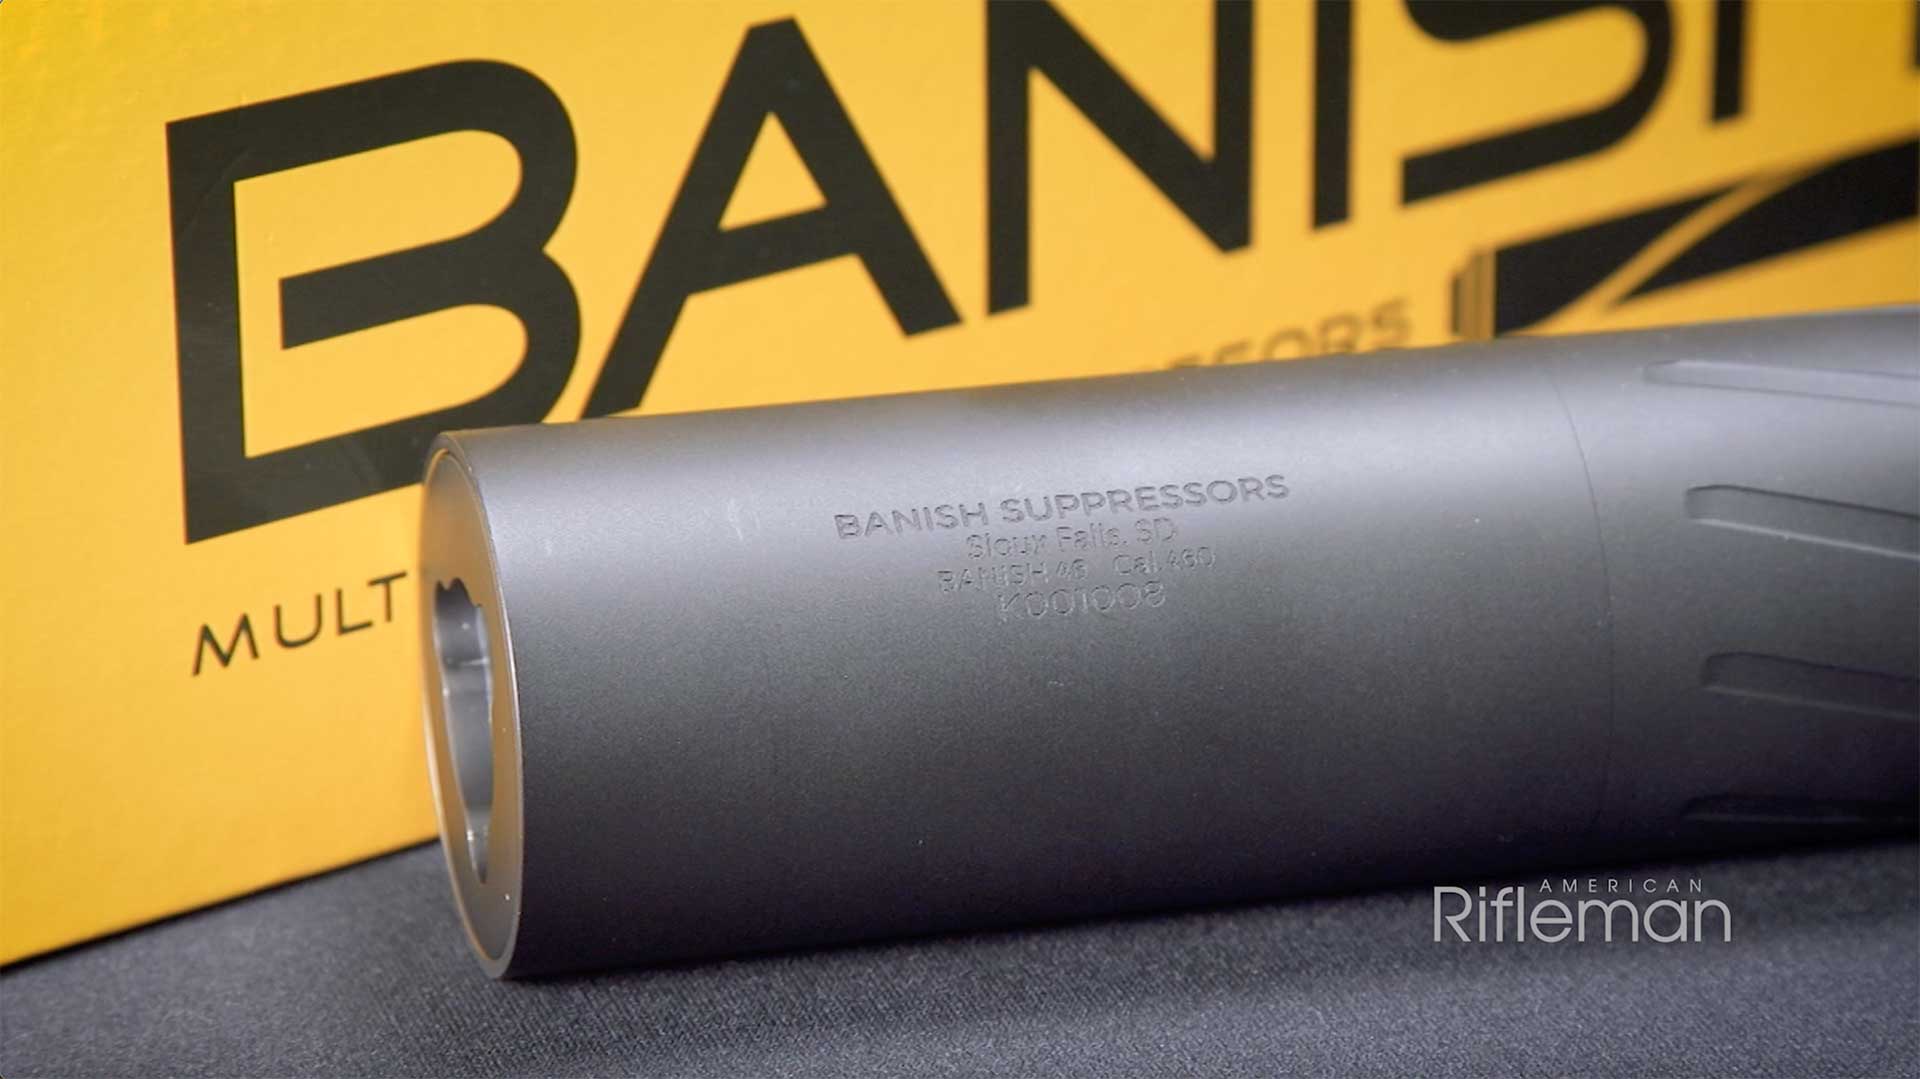 The front portion of a Silencer Central Banish 46 suppressor shown in front of a yellow box.